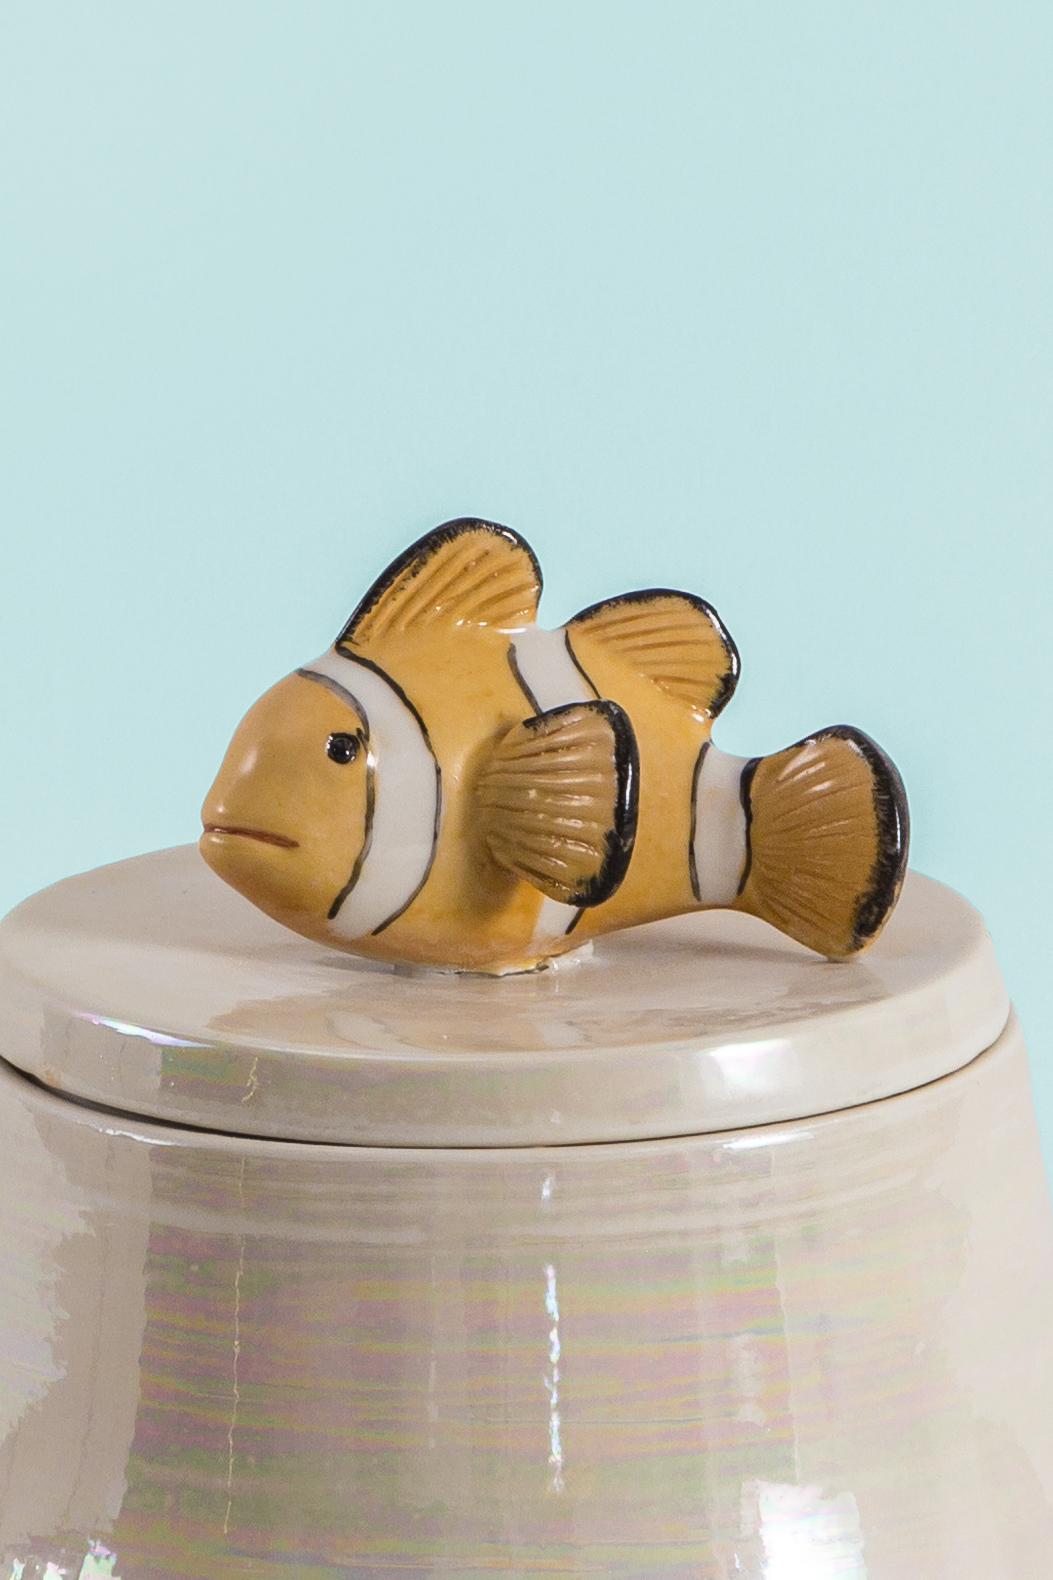 This Italian porcelain sculpture is part of Grand Tour by Vito Nesta. Made in Capodimonte porcelain with a glossy and iridescent finish. This pocket box is embellished by a hand painted clownfish.